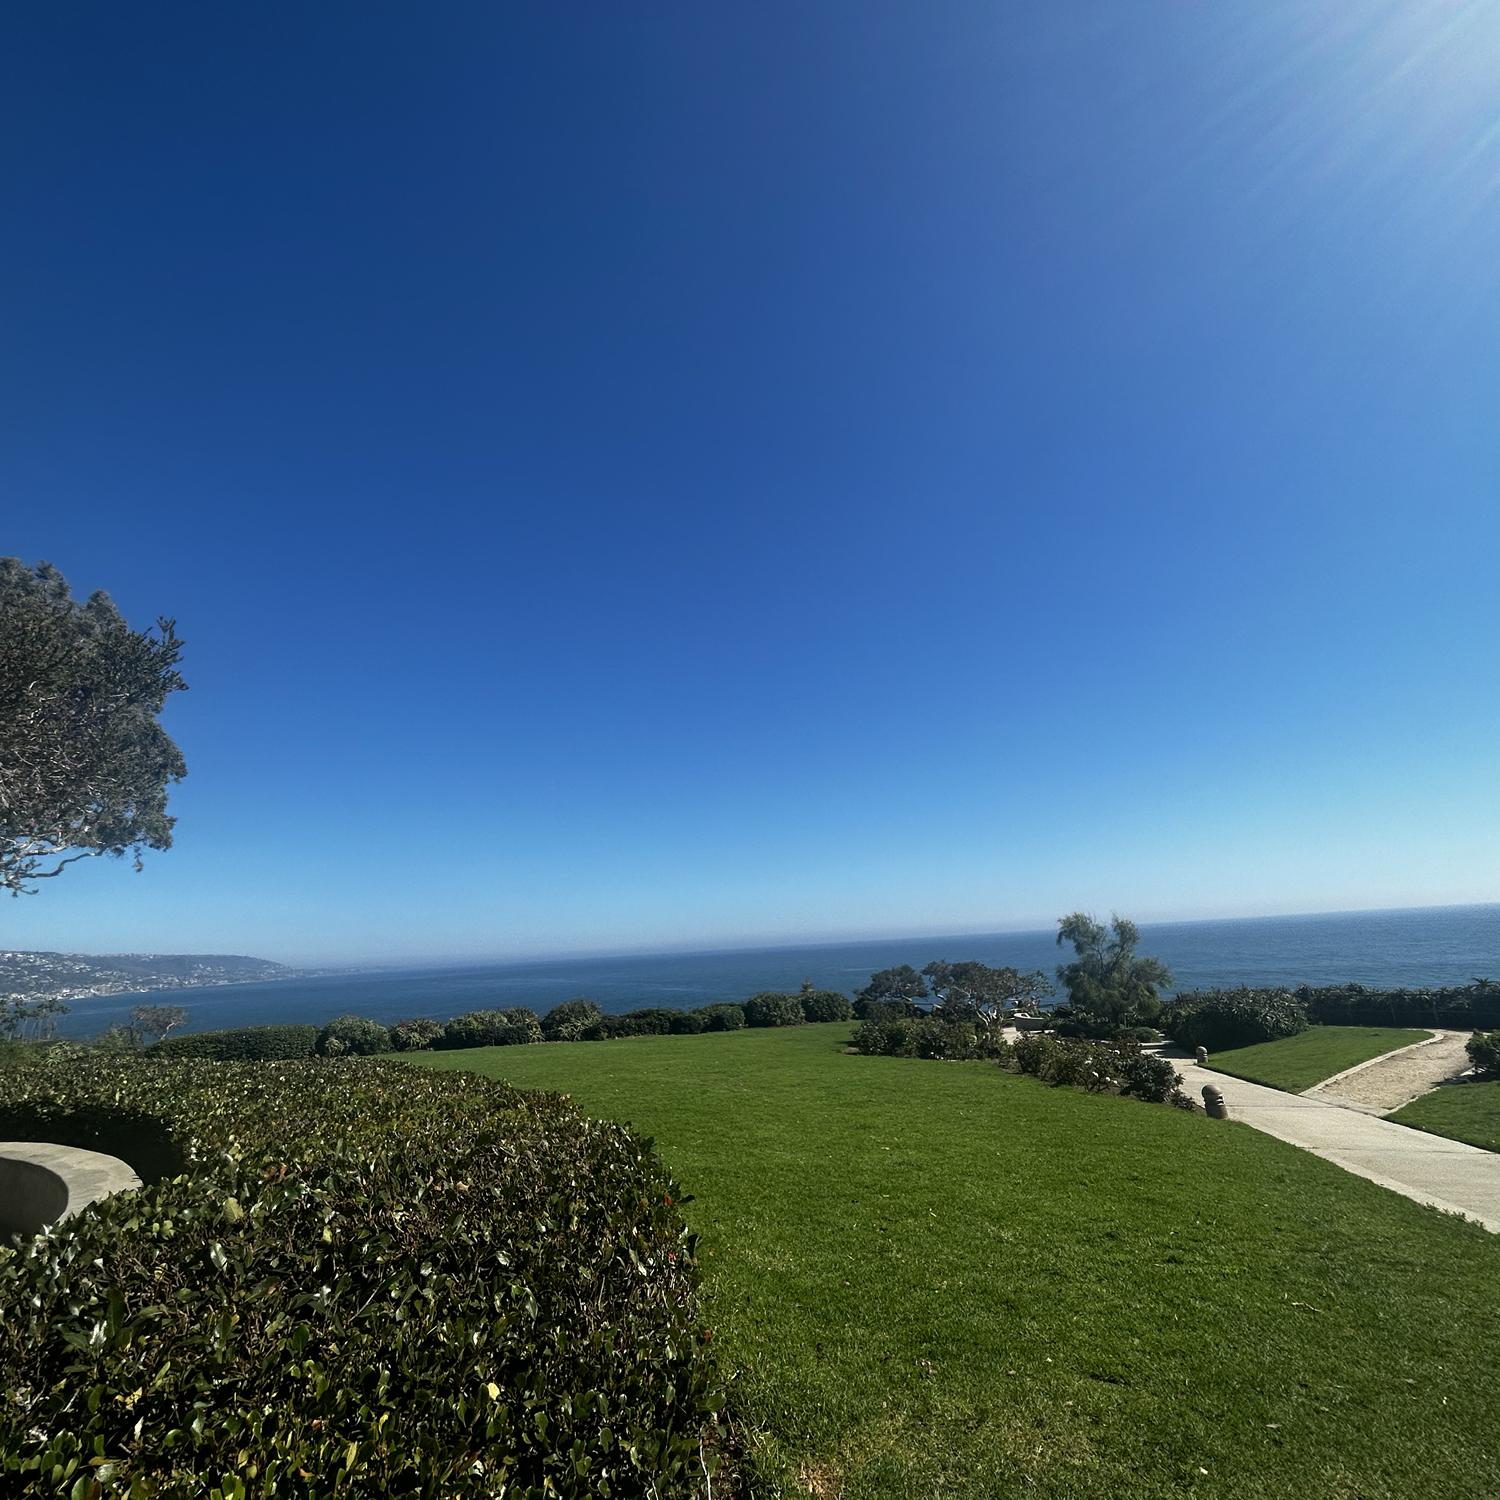 The ceremony location! There will be seating further down the pathway, with an even more stunning view of the coastline.